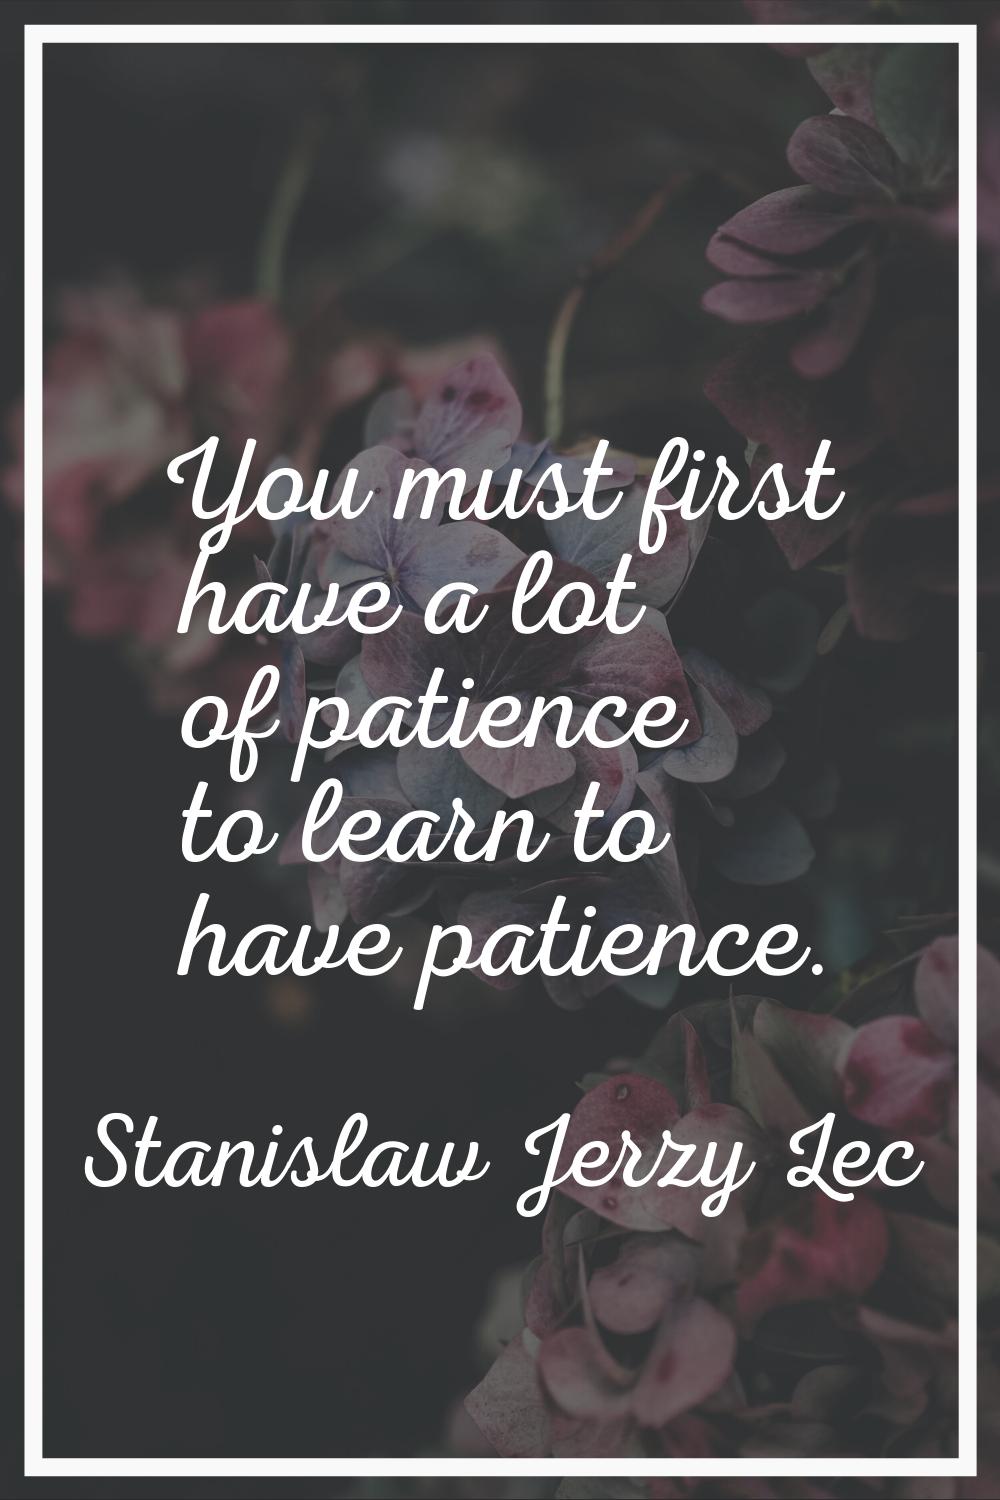 You must first have a lot of patience to learn to have patience.